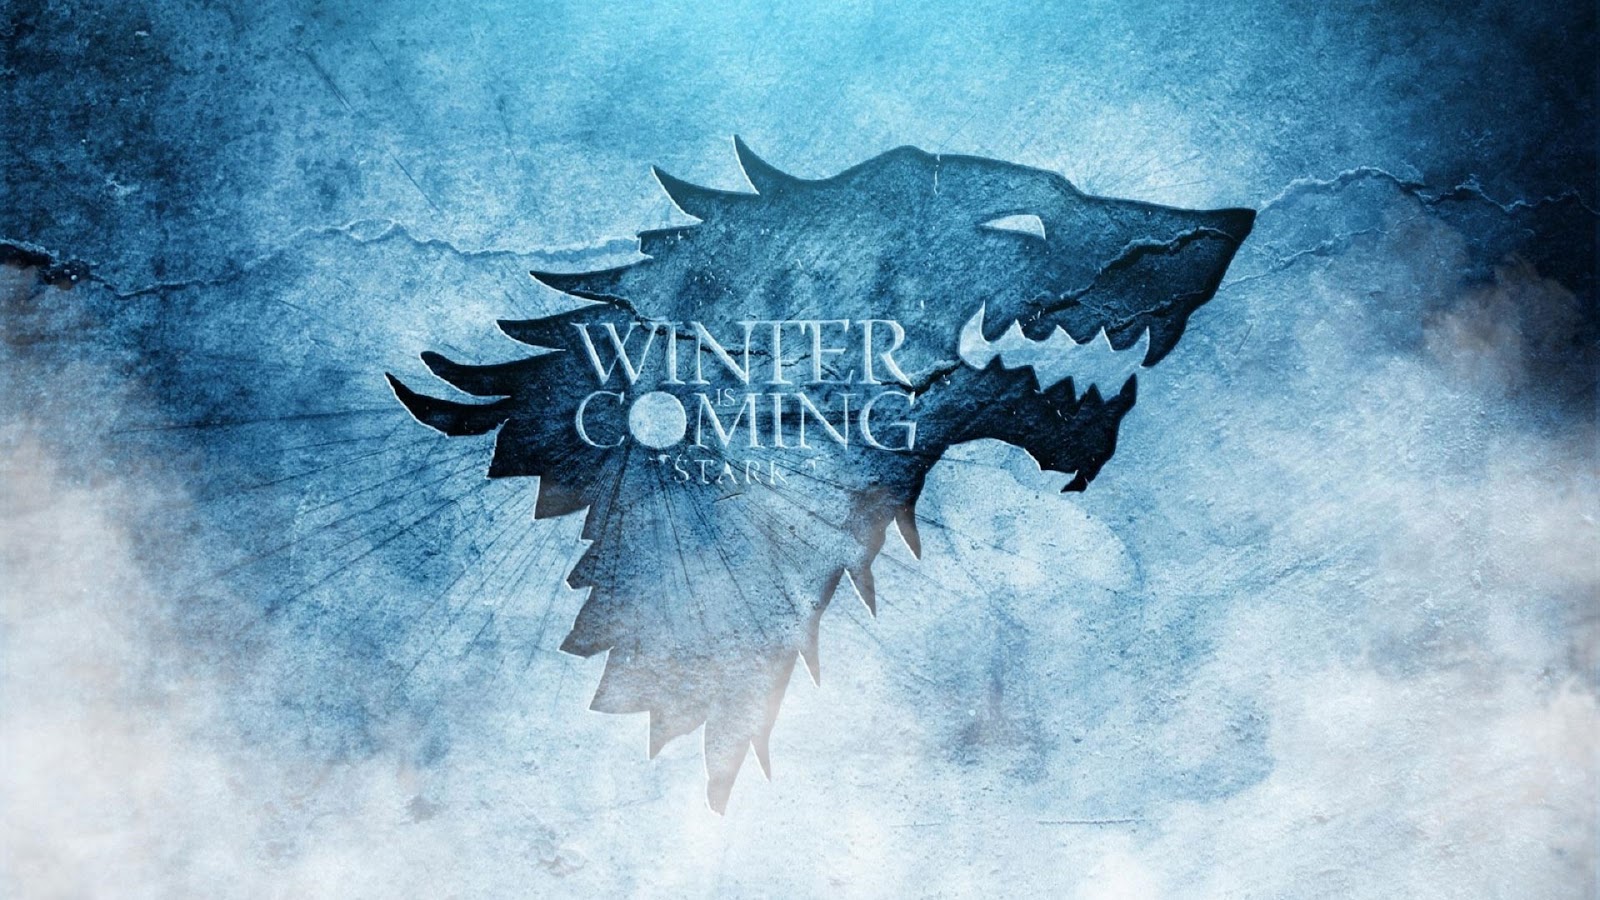 Game of thrones wallpaper hd